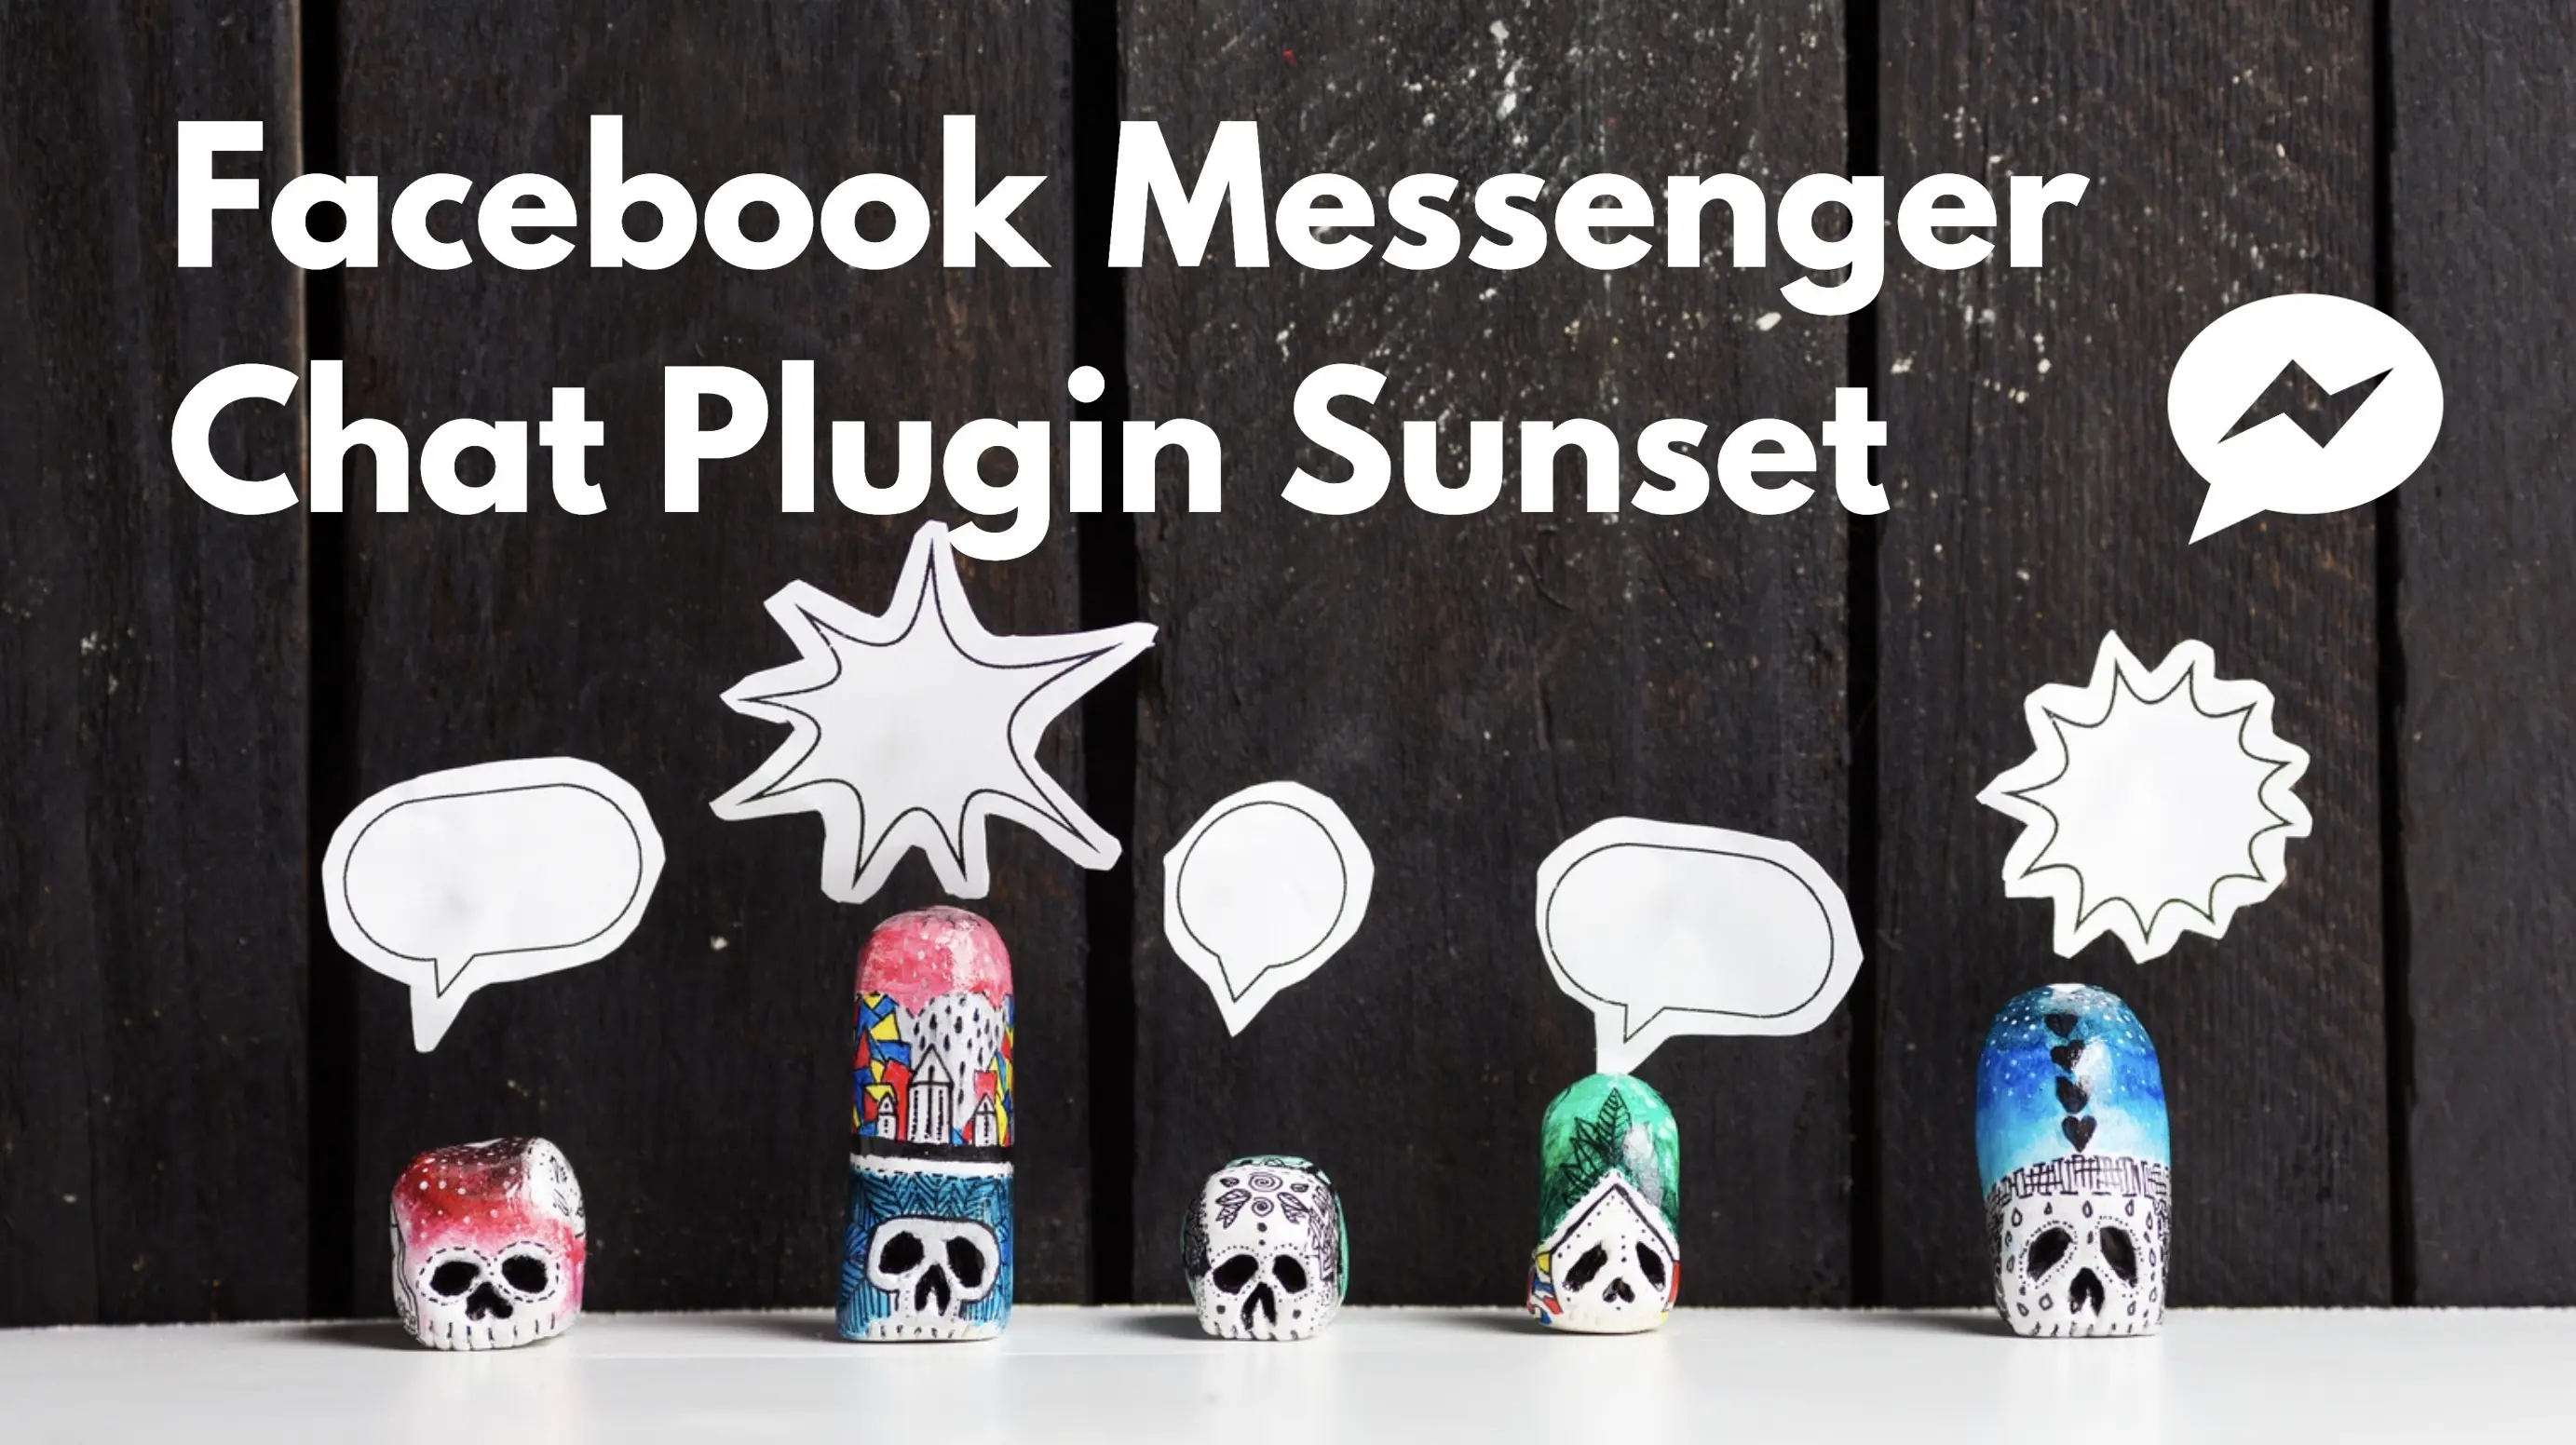 Facebook Messenger Chat Plugin Sunset: Thousands of Websites See Their Chat Solution Disappear